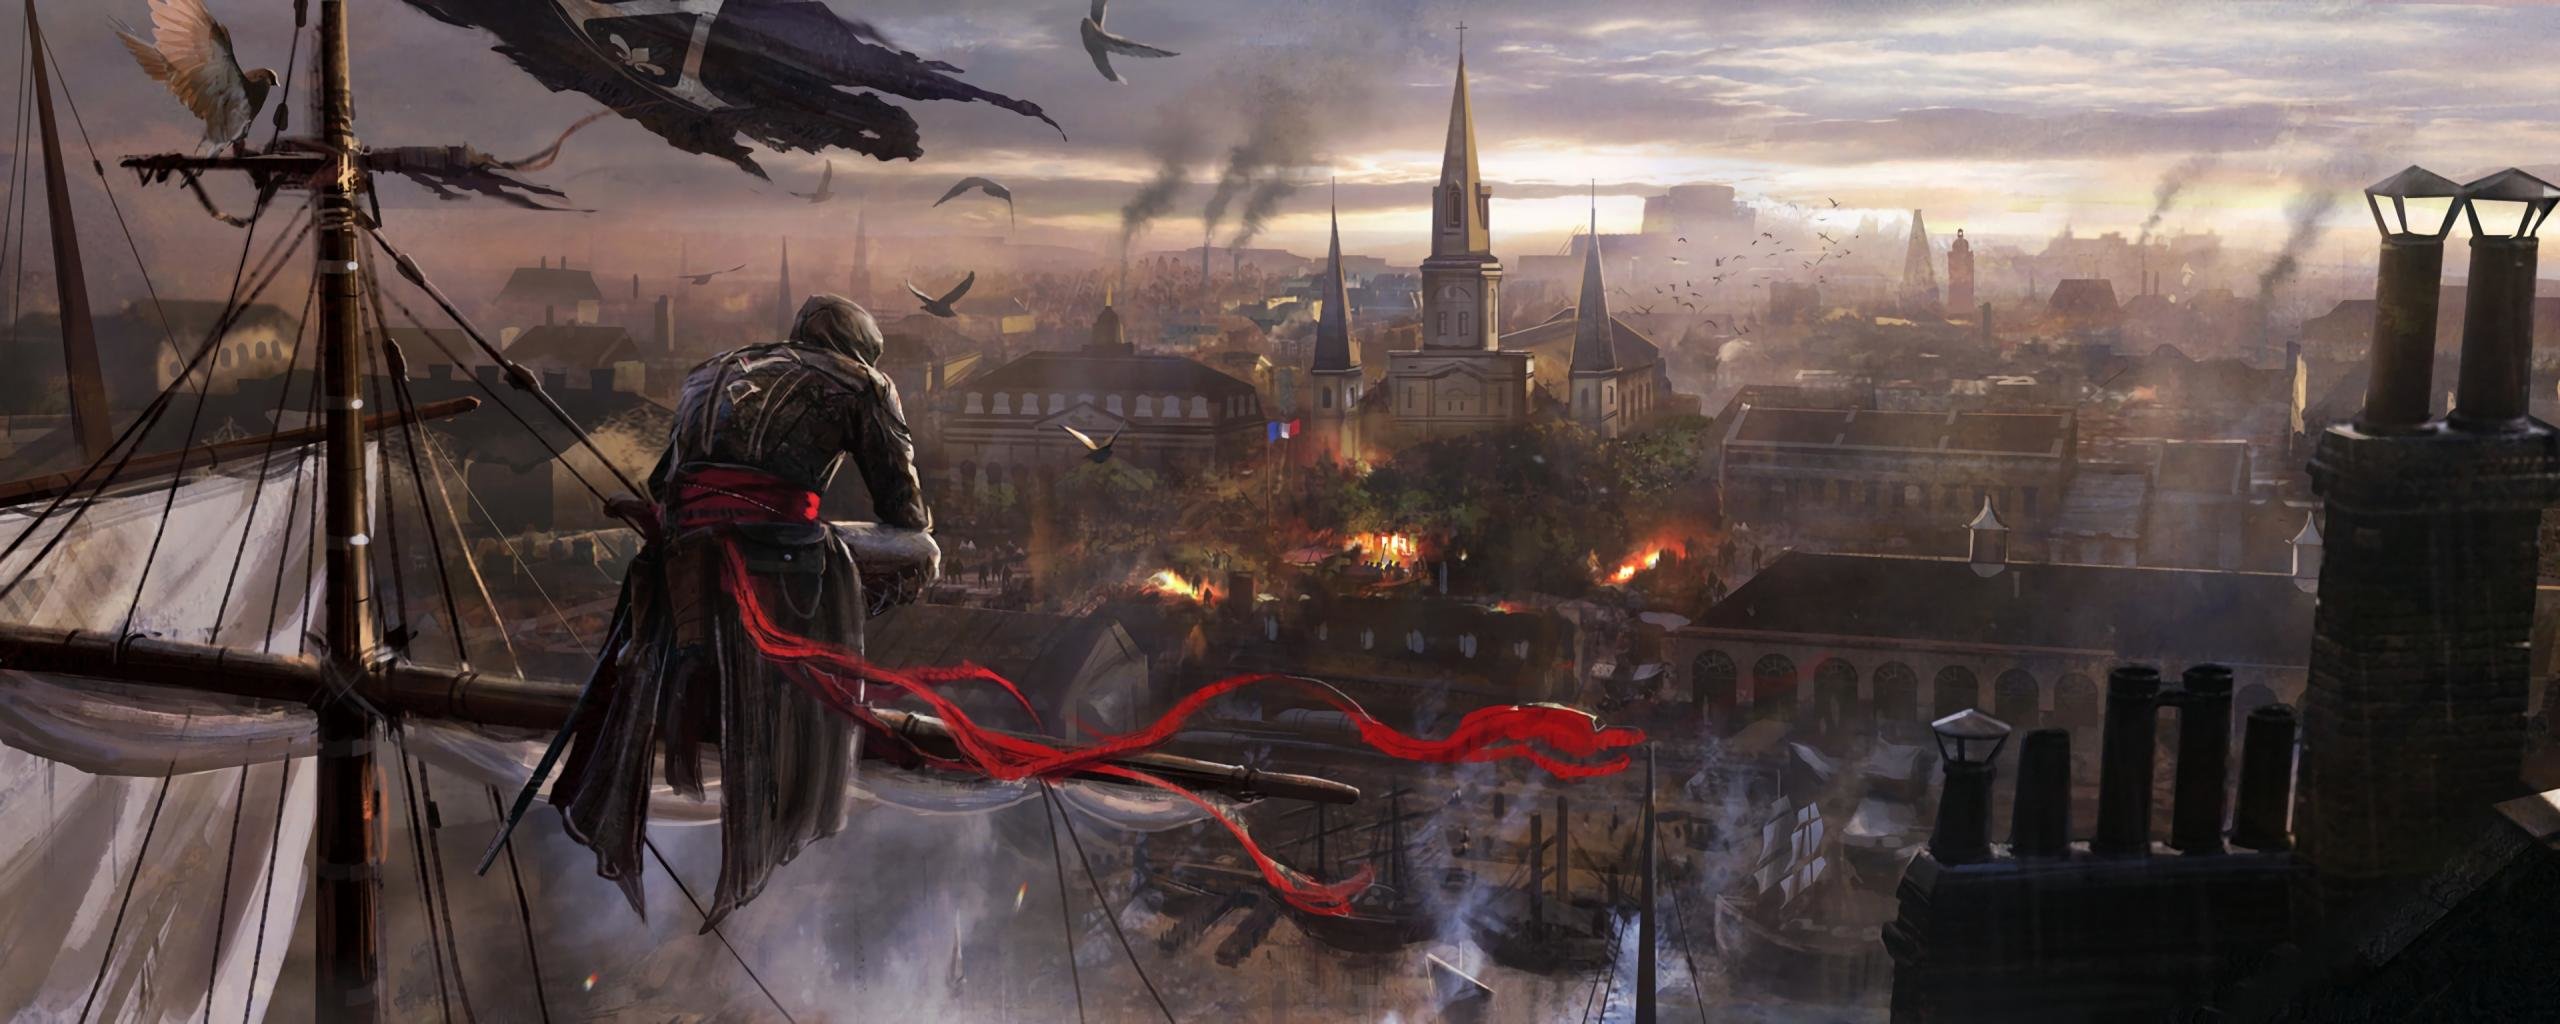 Best Assassin's Creed: Unity wallpaper ID:229493 for High Resolution dual monitor 2569x1024 PC